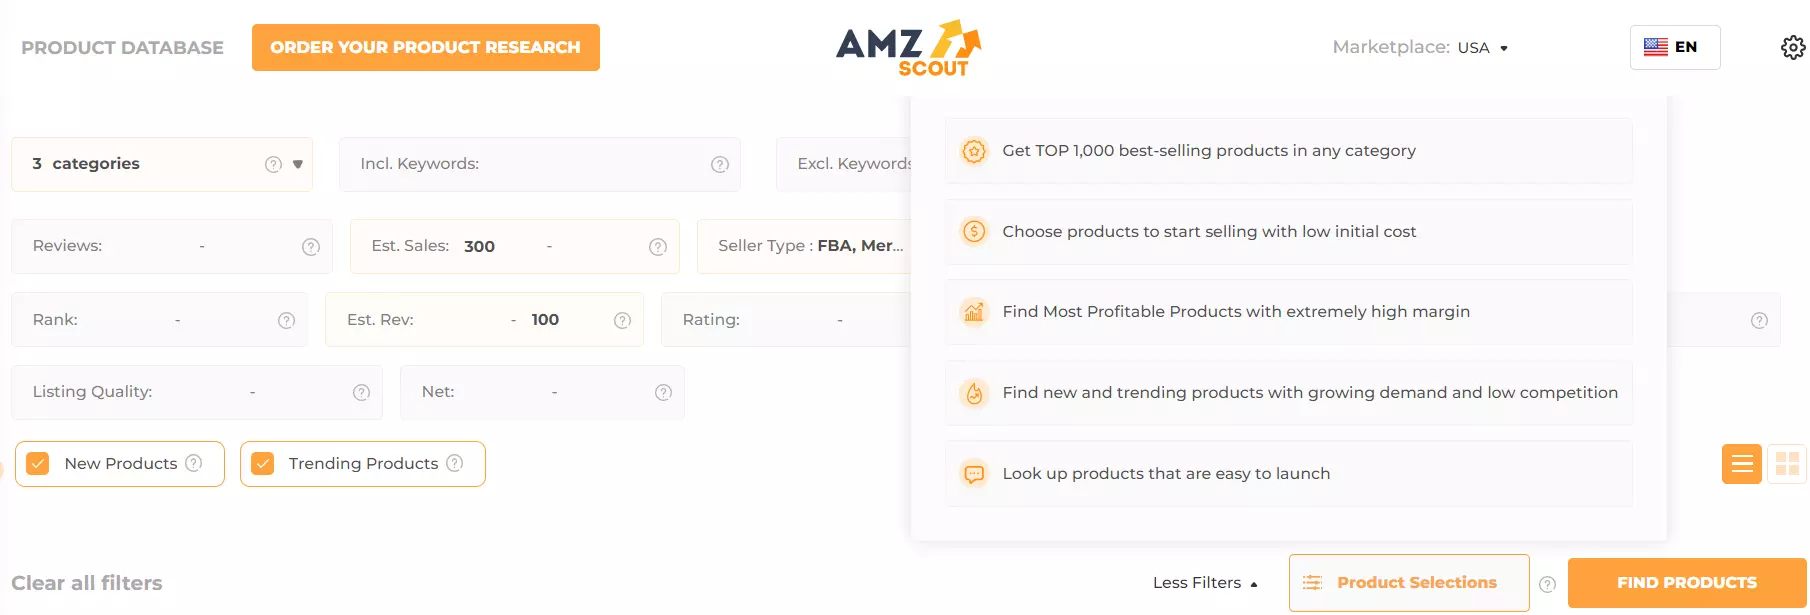 AMZScout Product Research